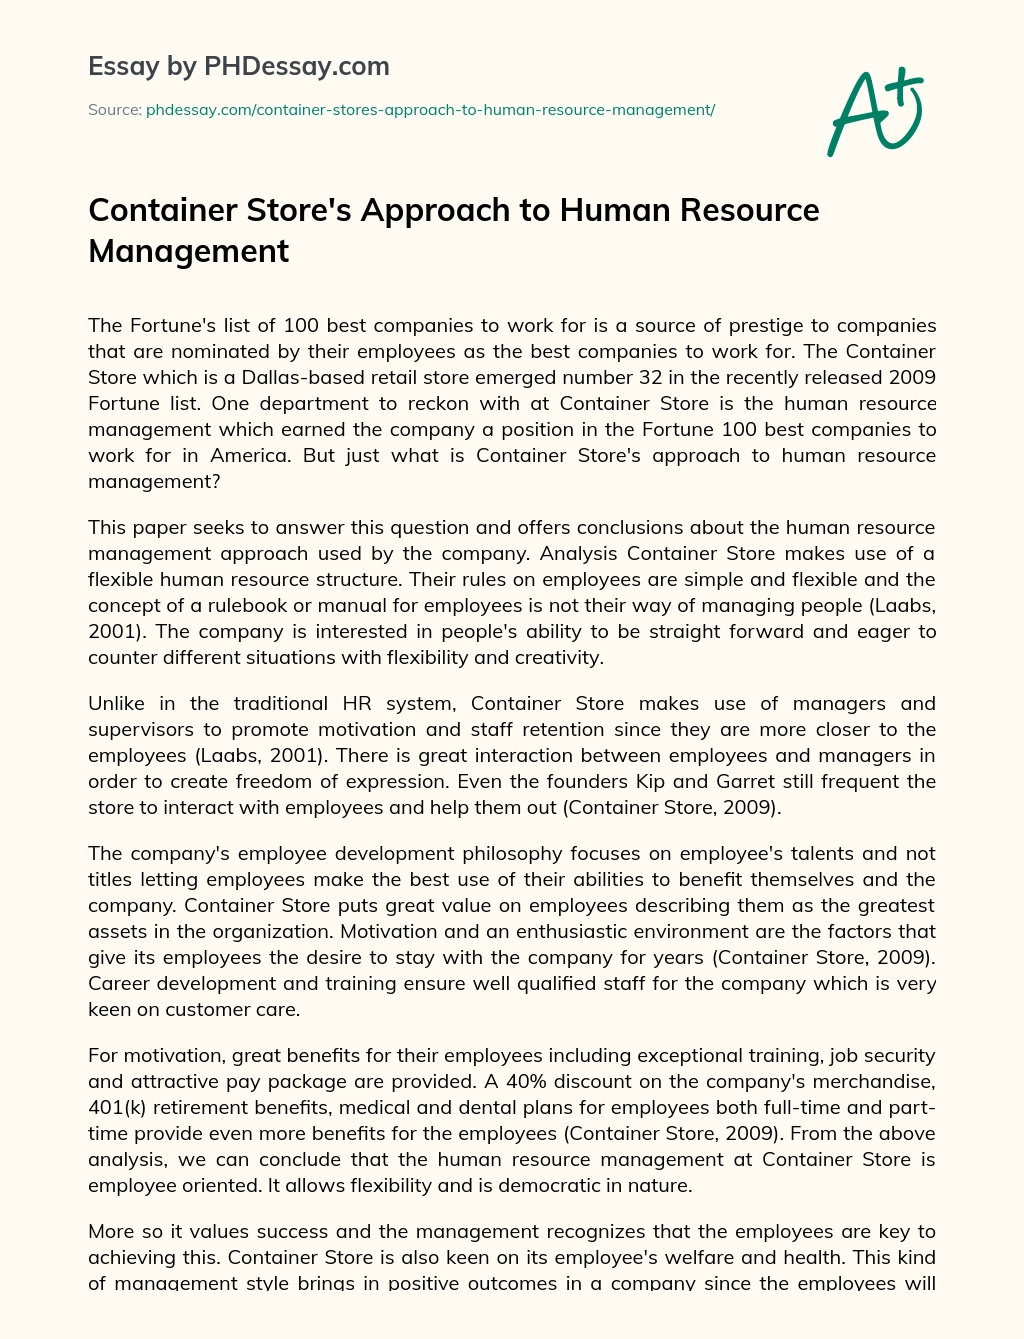 Container Store’s Approach to Human Resource Management essay